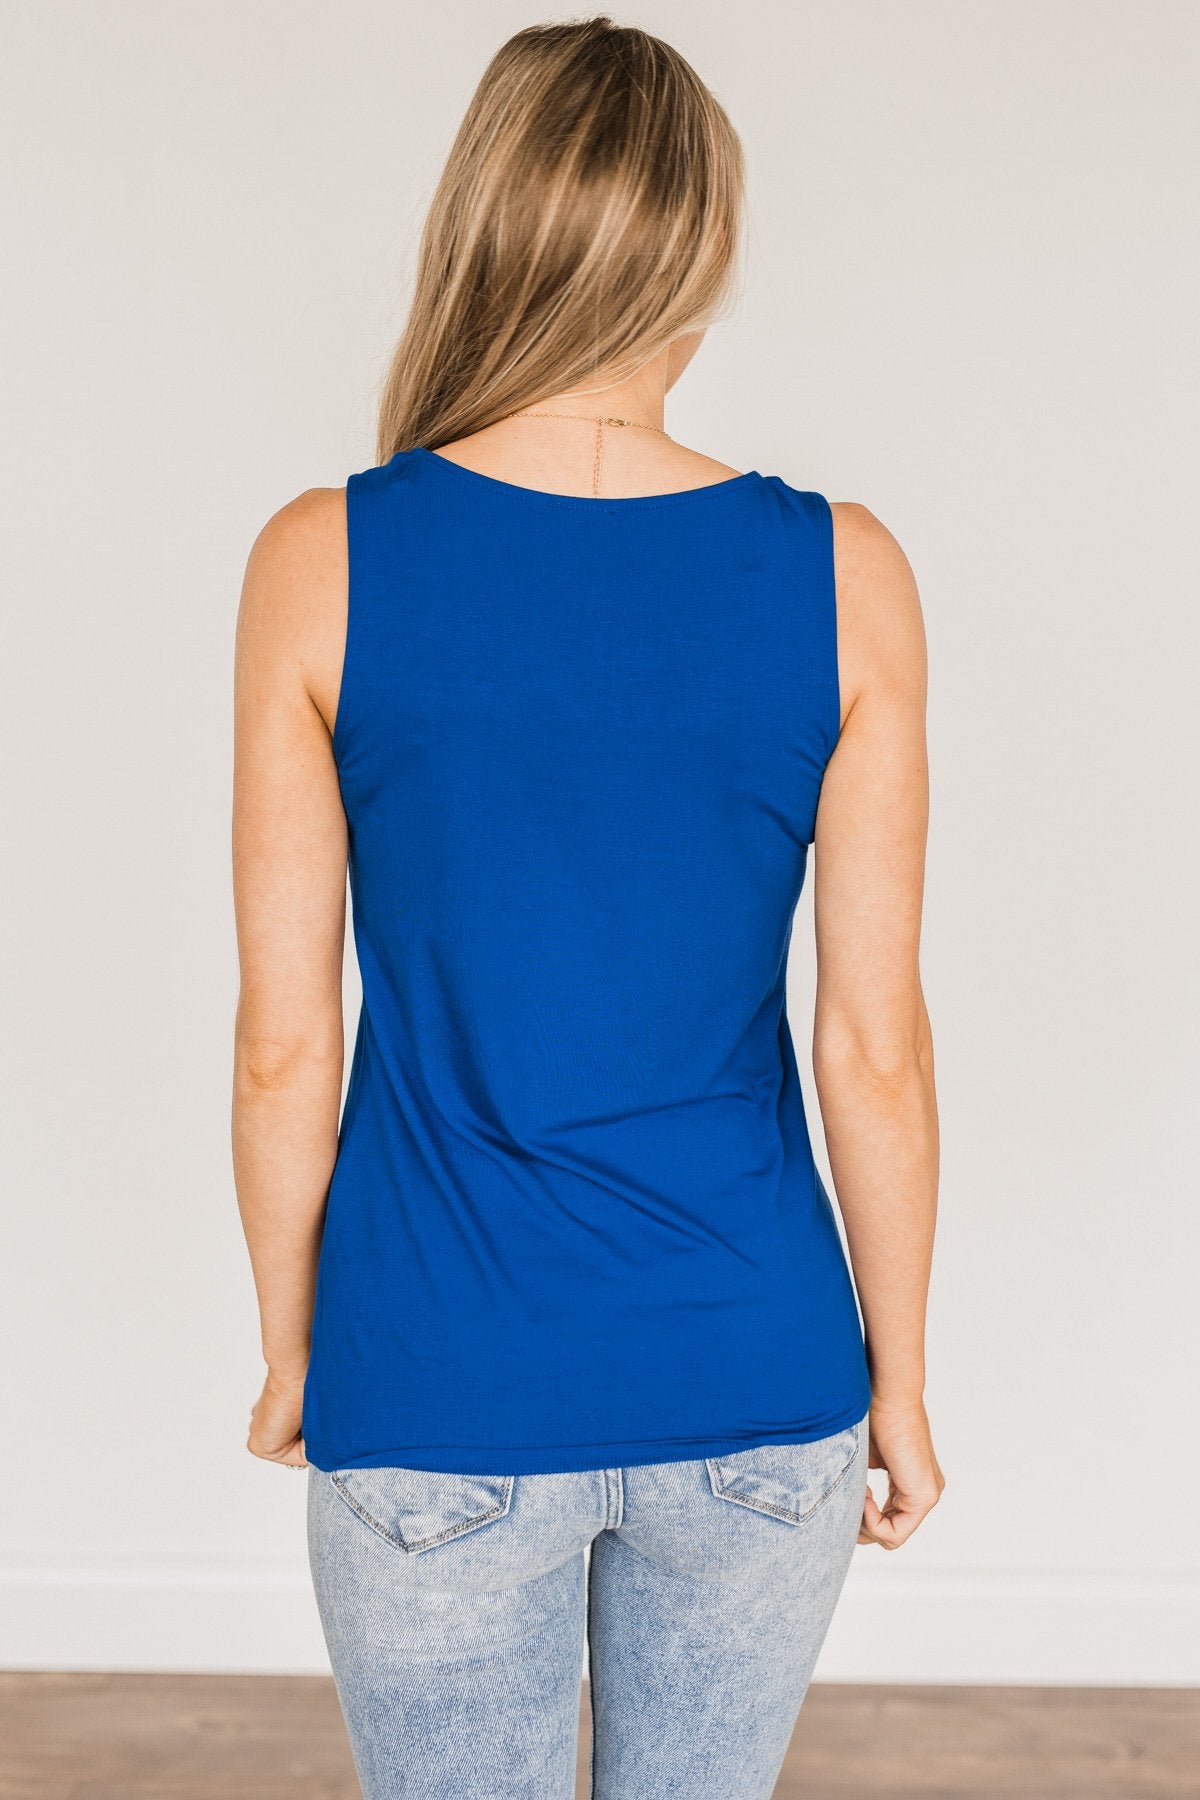 Kriger Goneryl 鍔 Places To Go Criss-Cross Tank Top- Royal Blue – The Pulse Boutique